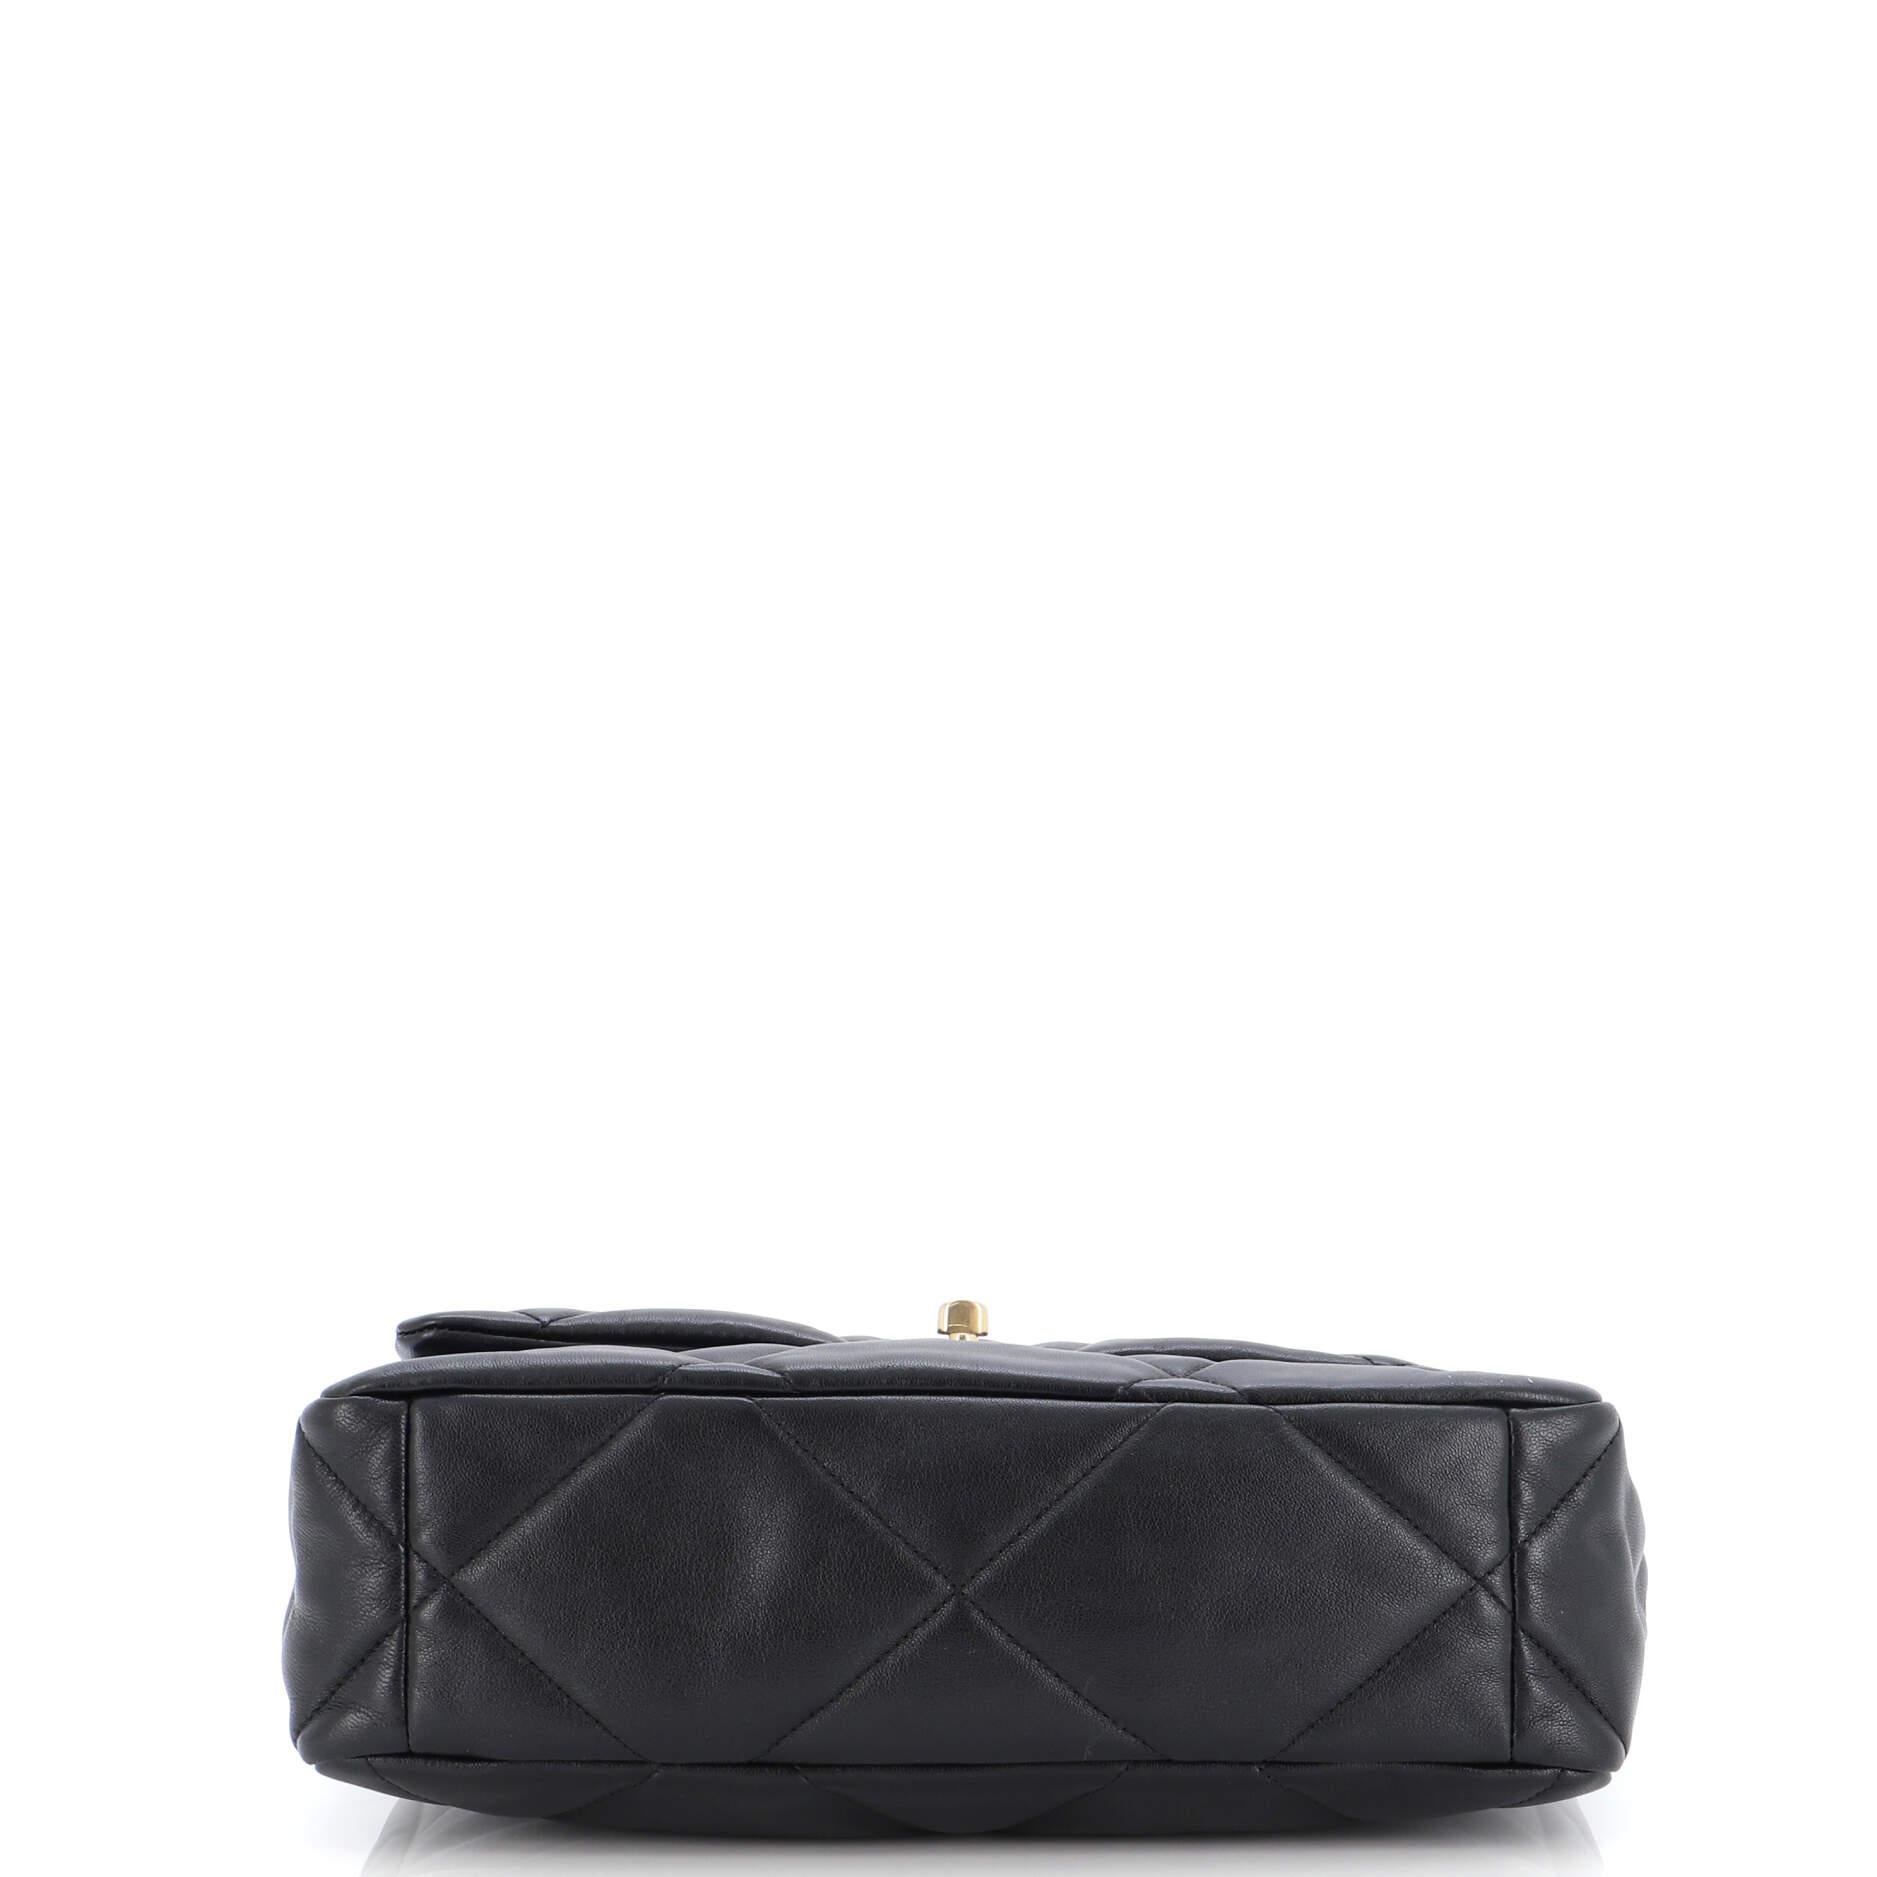 Chanel 19 Flap Bag Quilted Leather Large 1